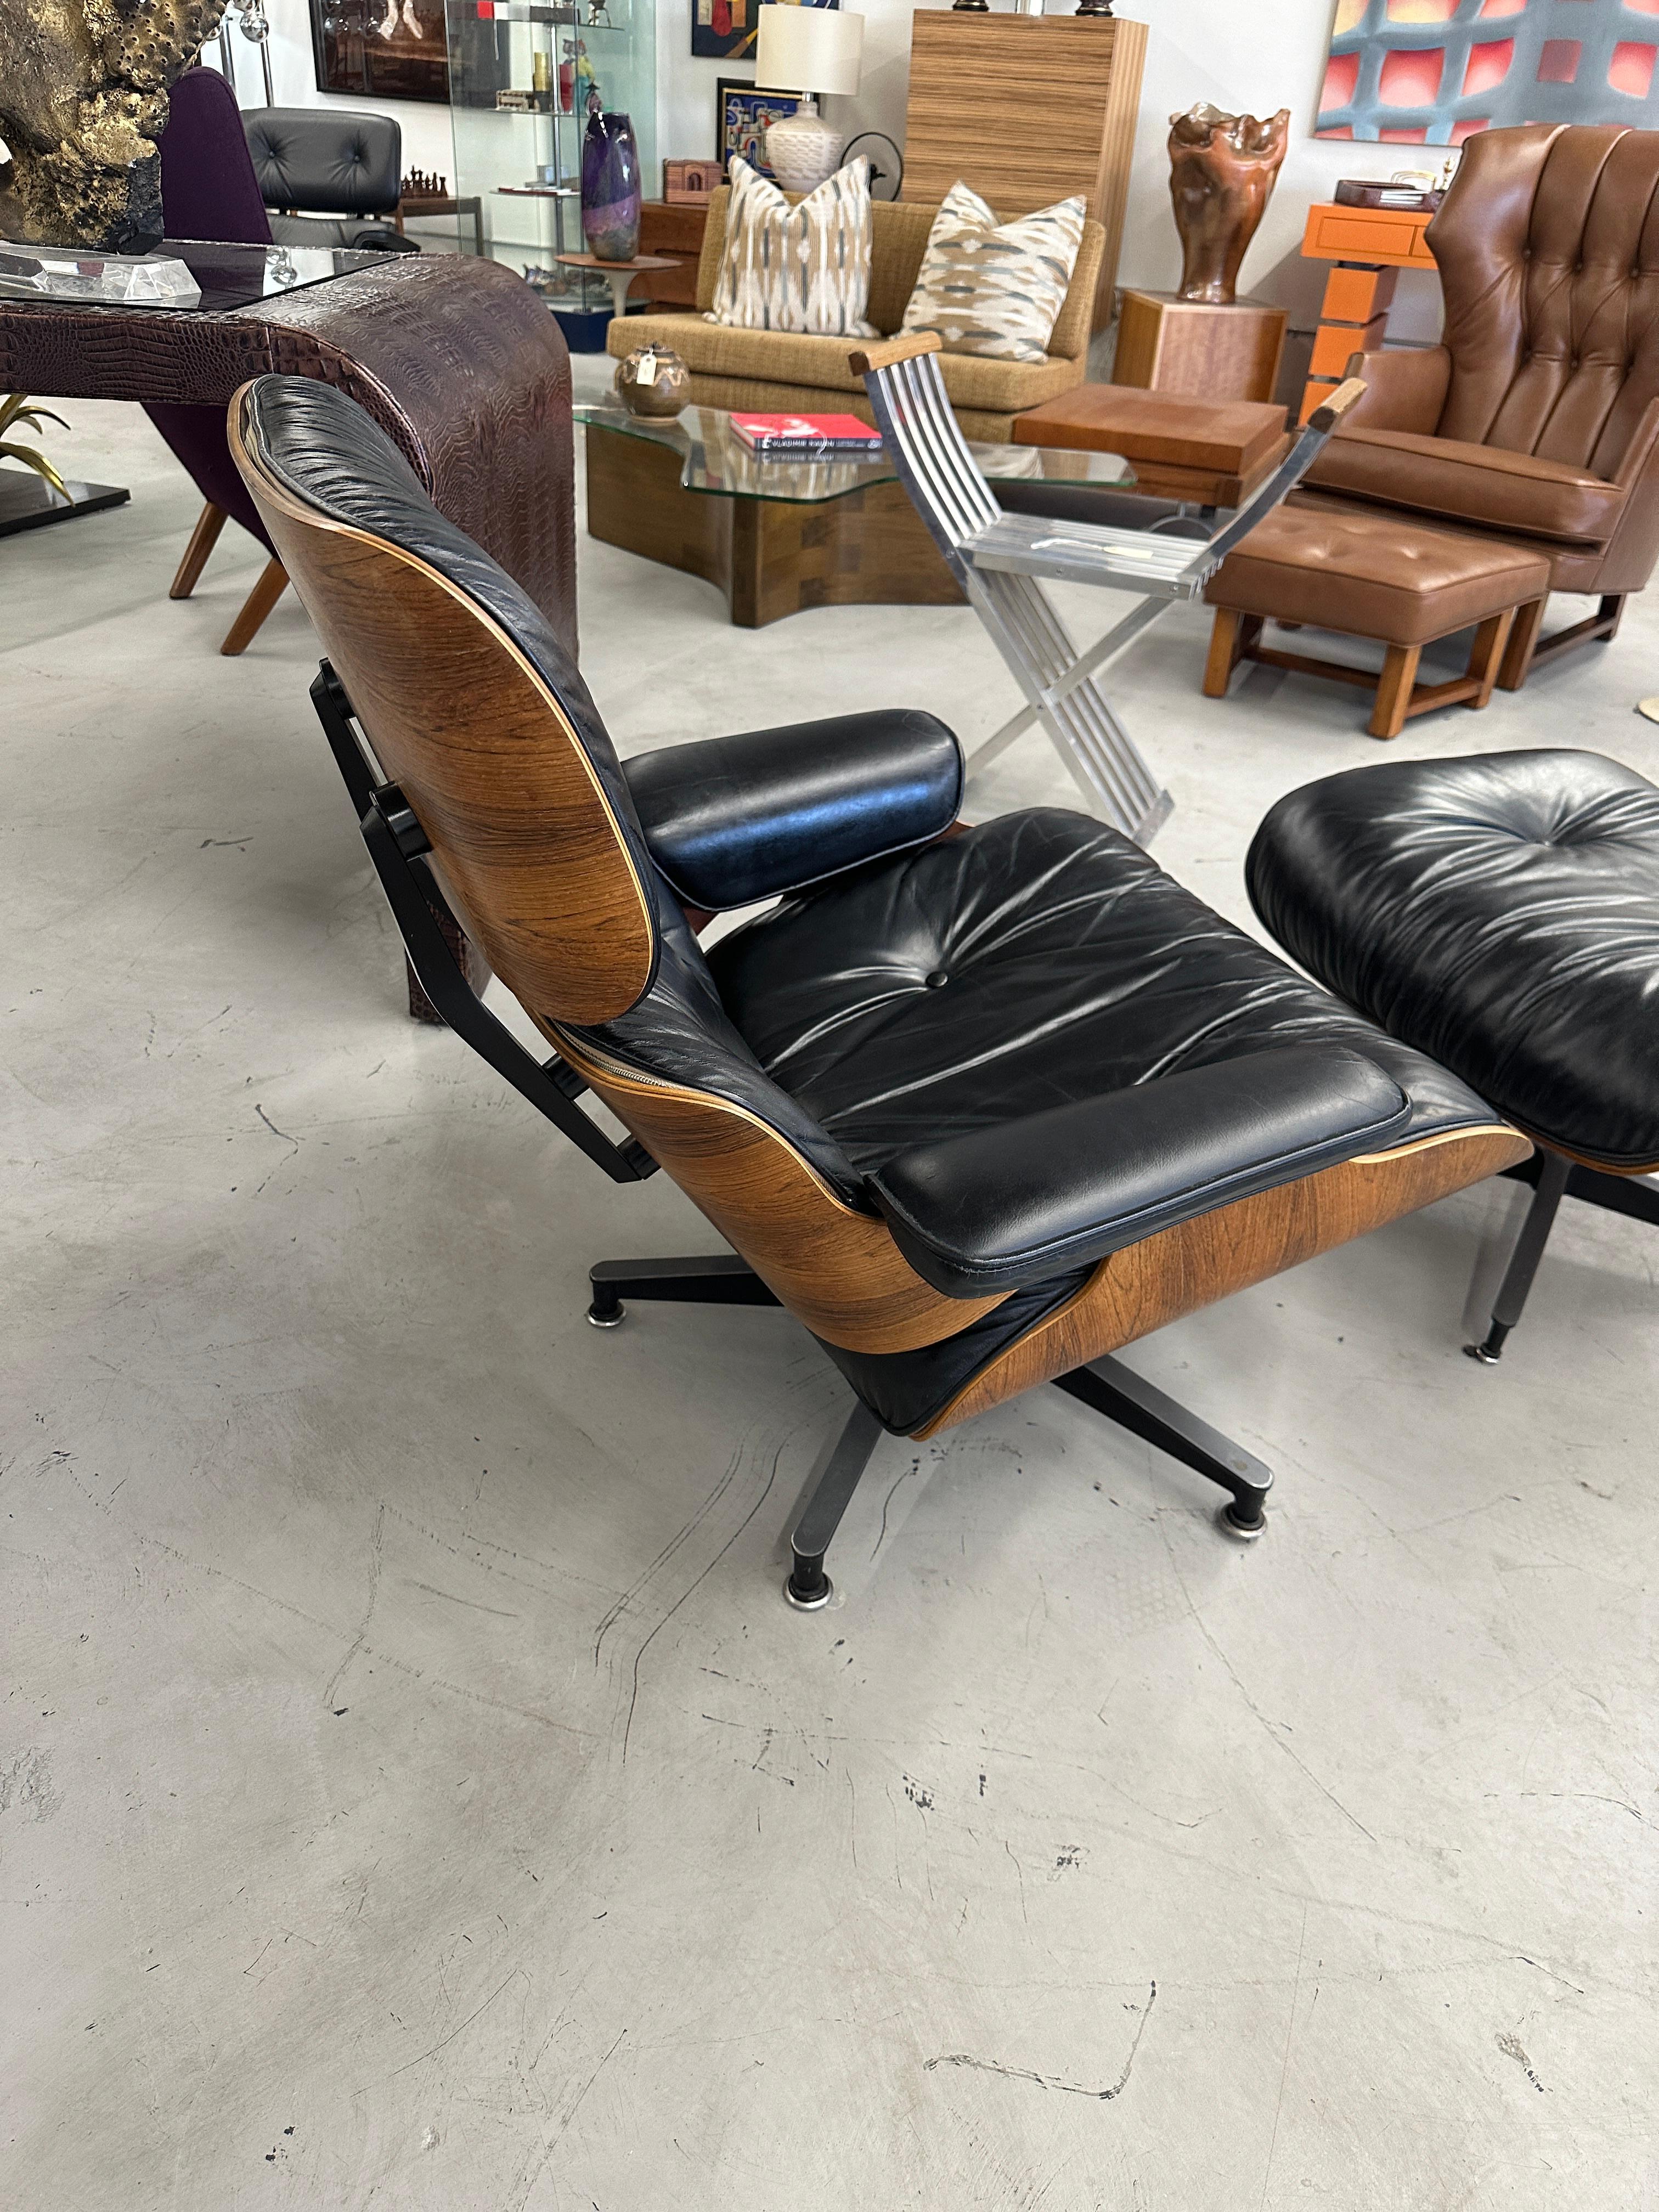 A beautiful vintage rosewood Herman Miller Eames chair and ottoman from the 1978. The chair and ottoman have the down filled cushions and are wonderfully broken in and are extremely comfortable. The chair has the original Herman Miller tag paper